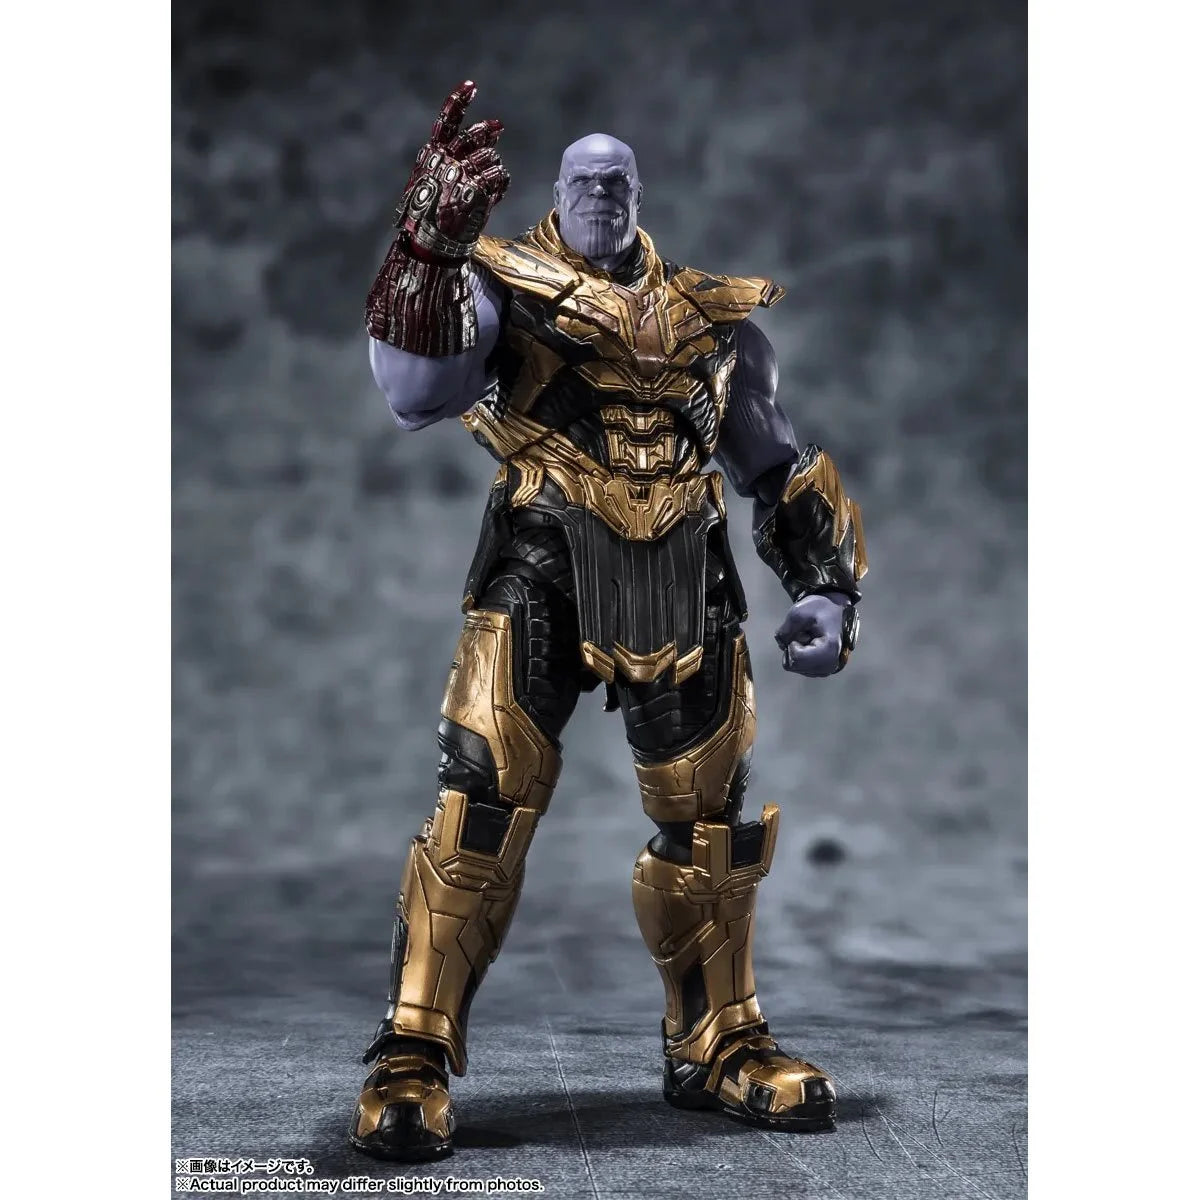 Avengers Endgame Thanos Five Years Later 2023 Edition Infinity Saga Action Figure by S.H.Figuarts -SH Figuarts - India - www.superherotoystore.com